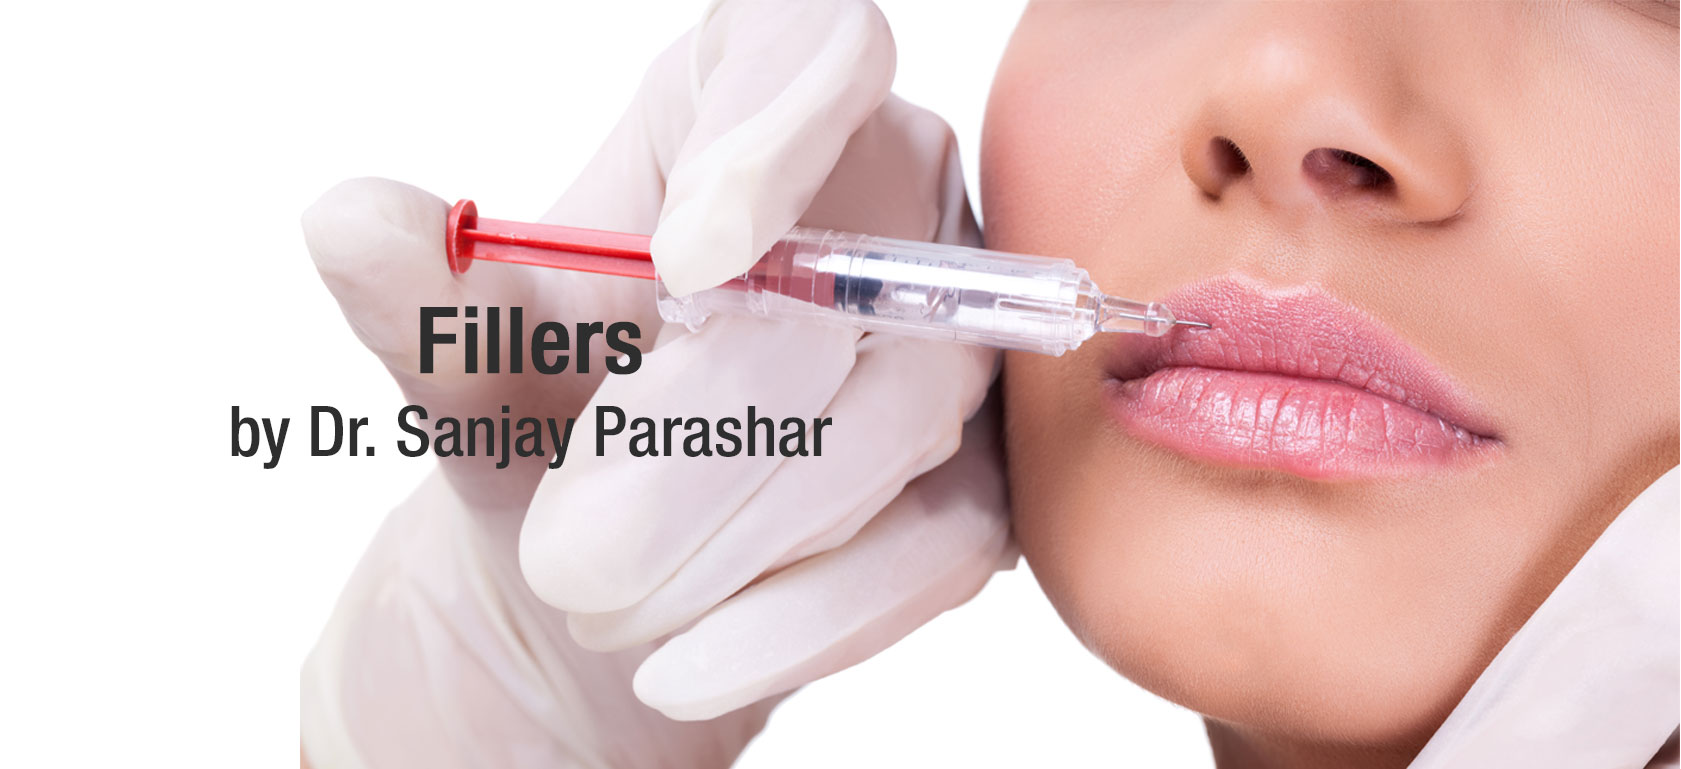 Lip Fillers Dubai - Anti Aging Fillers & Injections - Facial Fillers - By Dr Sanjay Parashar